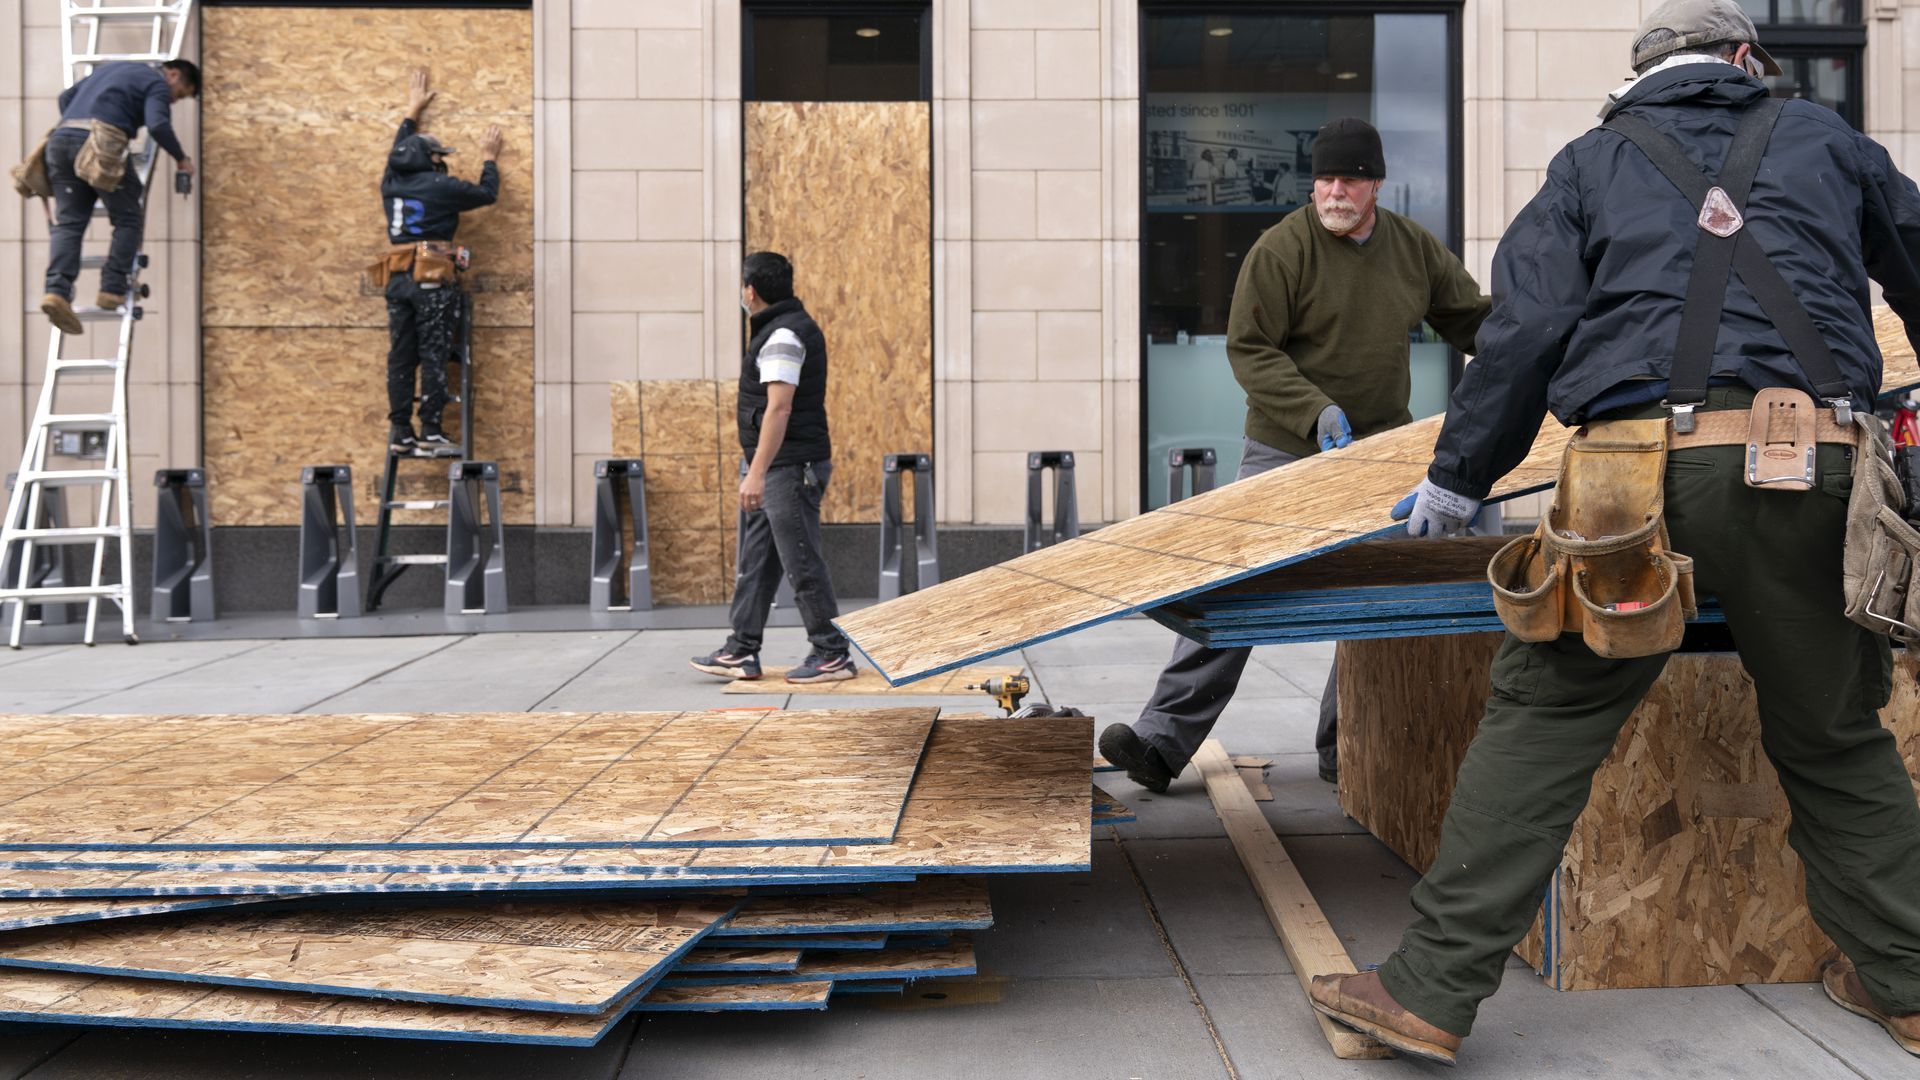 Workers board up Walgreens on U Street NW in D.C. yesterday.